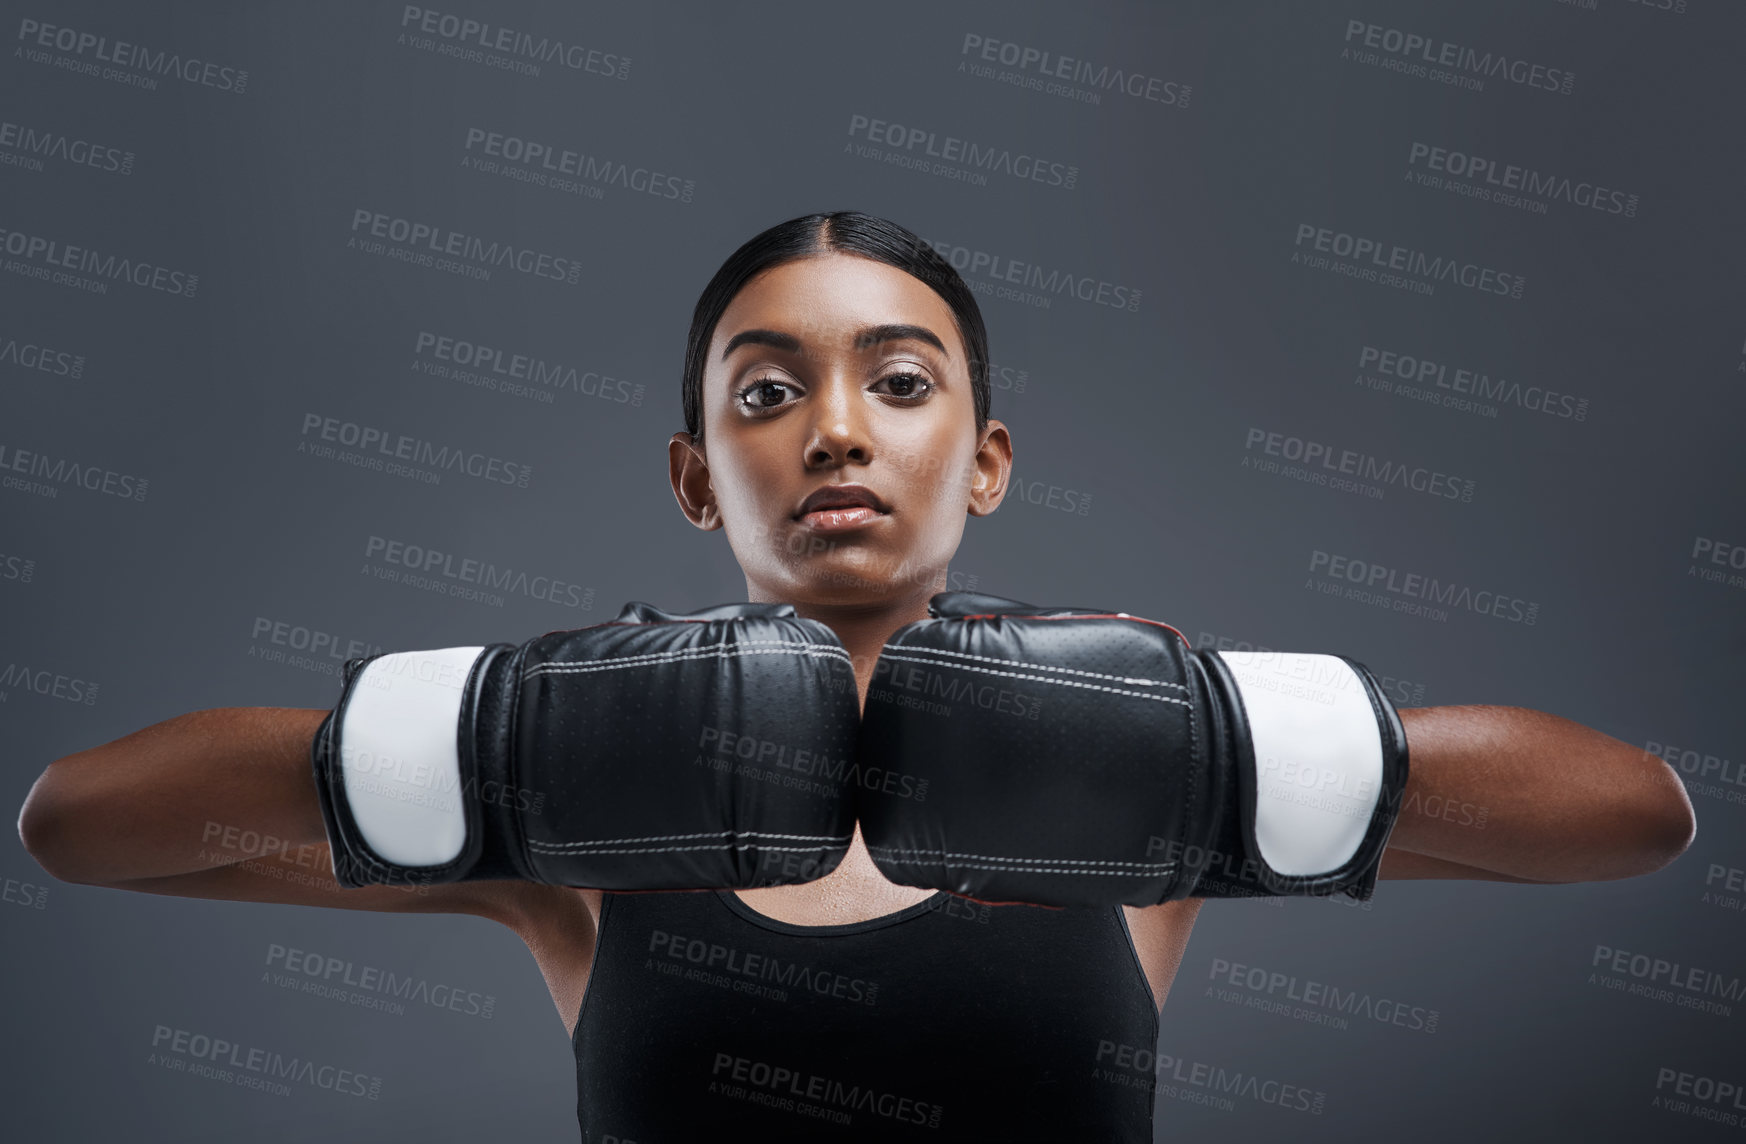 Buy stock photo Studio portrait of a sporty young woman wearing boxing gloves against a grey background